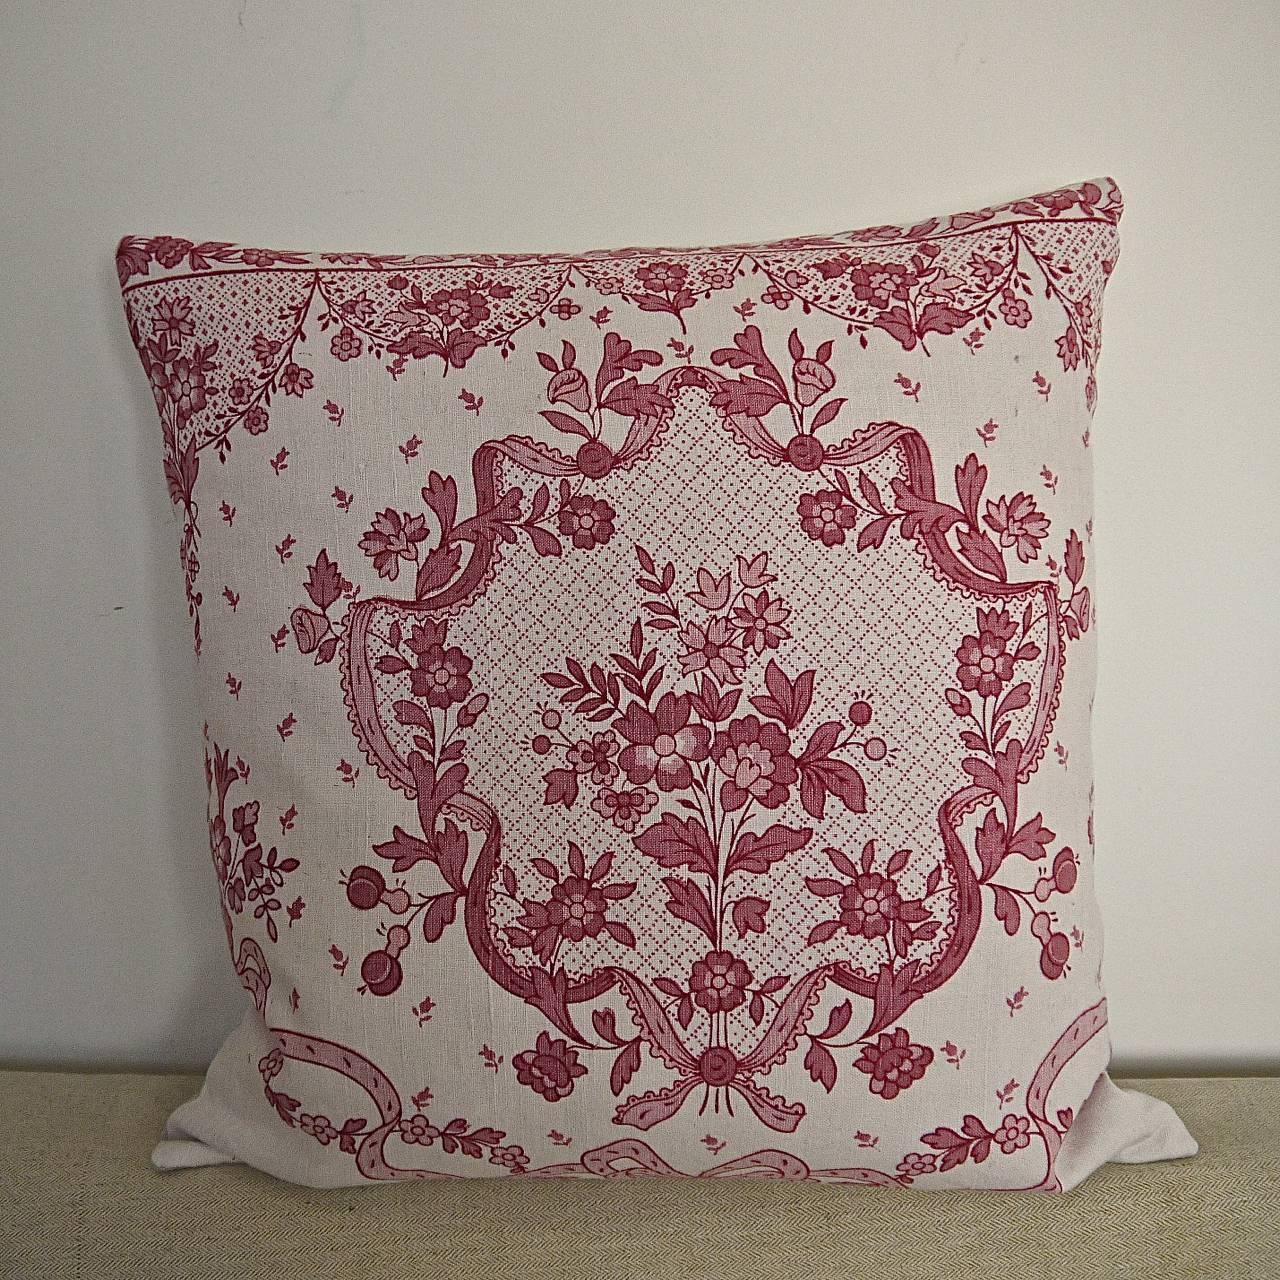 Early 20th century French linen cushion printed with a pretty red and pink small bouquet of flowers surrounded by a frilled ribbon and bow.
Backed in a vintage French linen and slip-stitched closed with a duck feather insert.